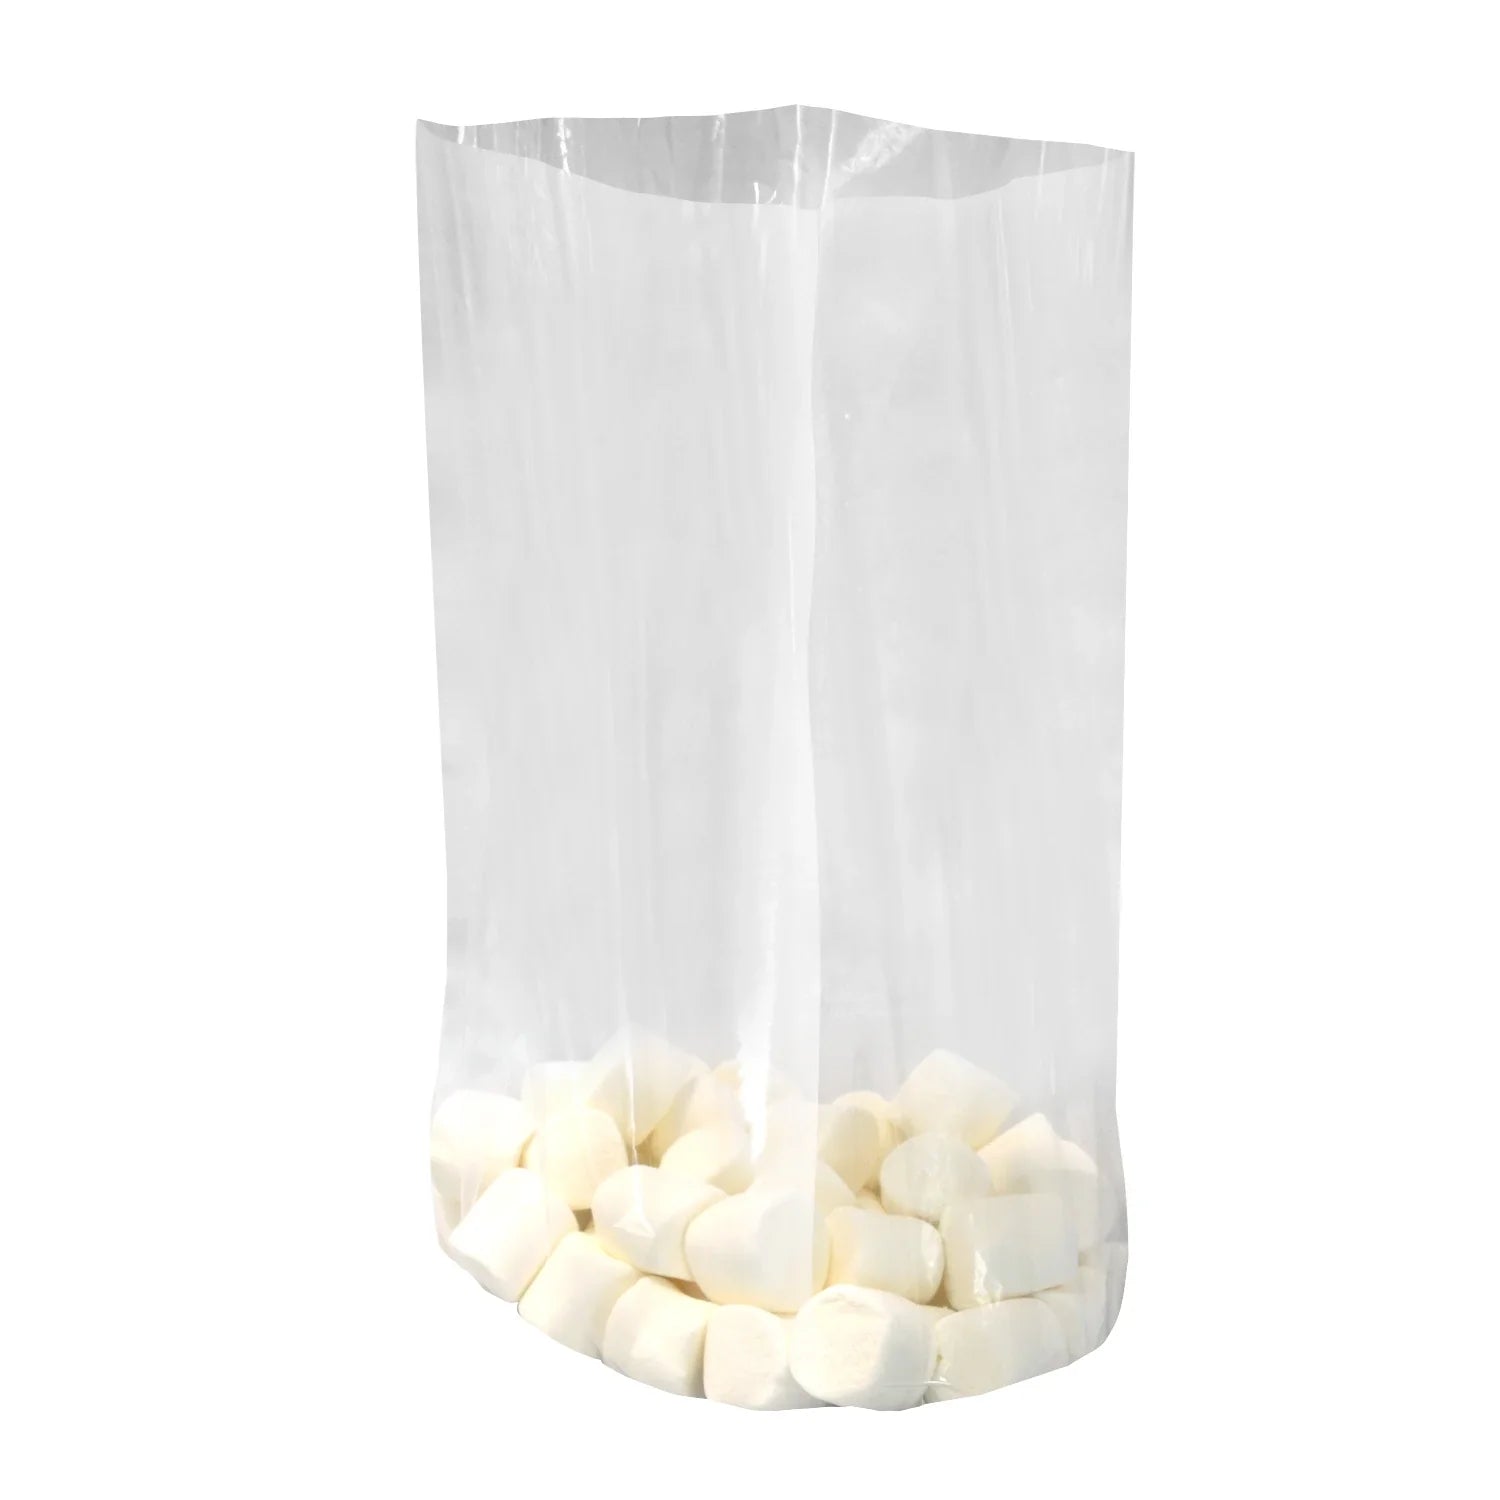 Food Packaging Bags Types and Uses  XL Plastics